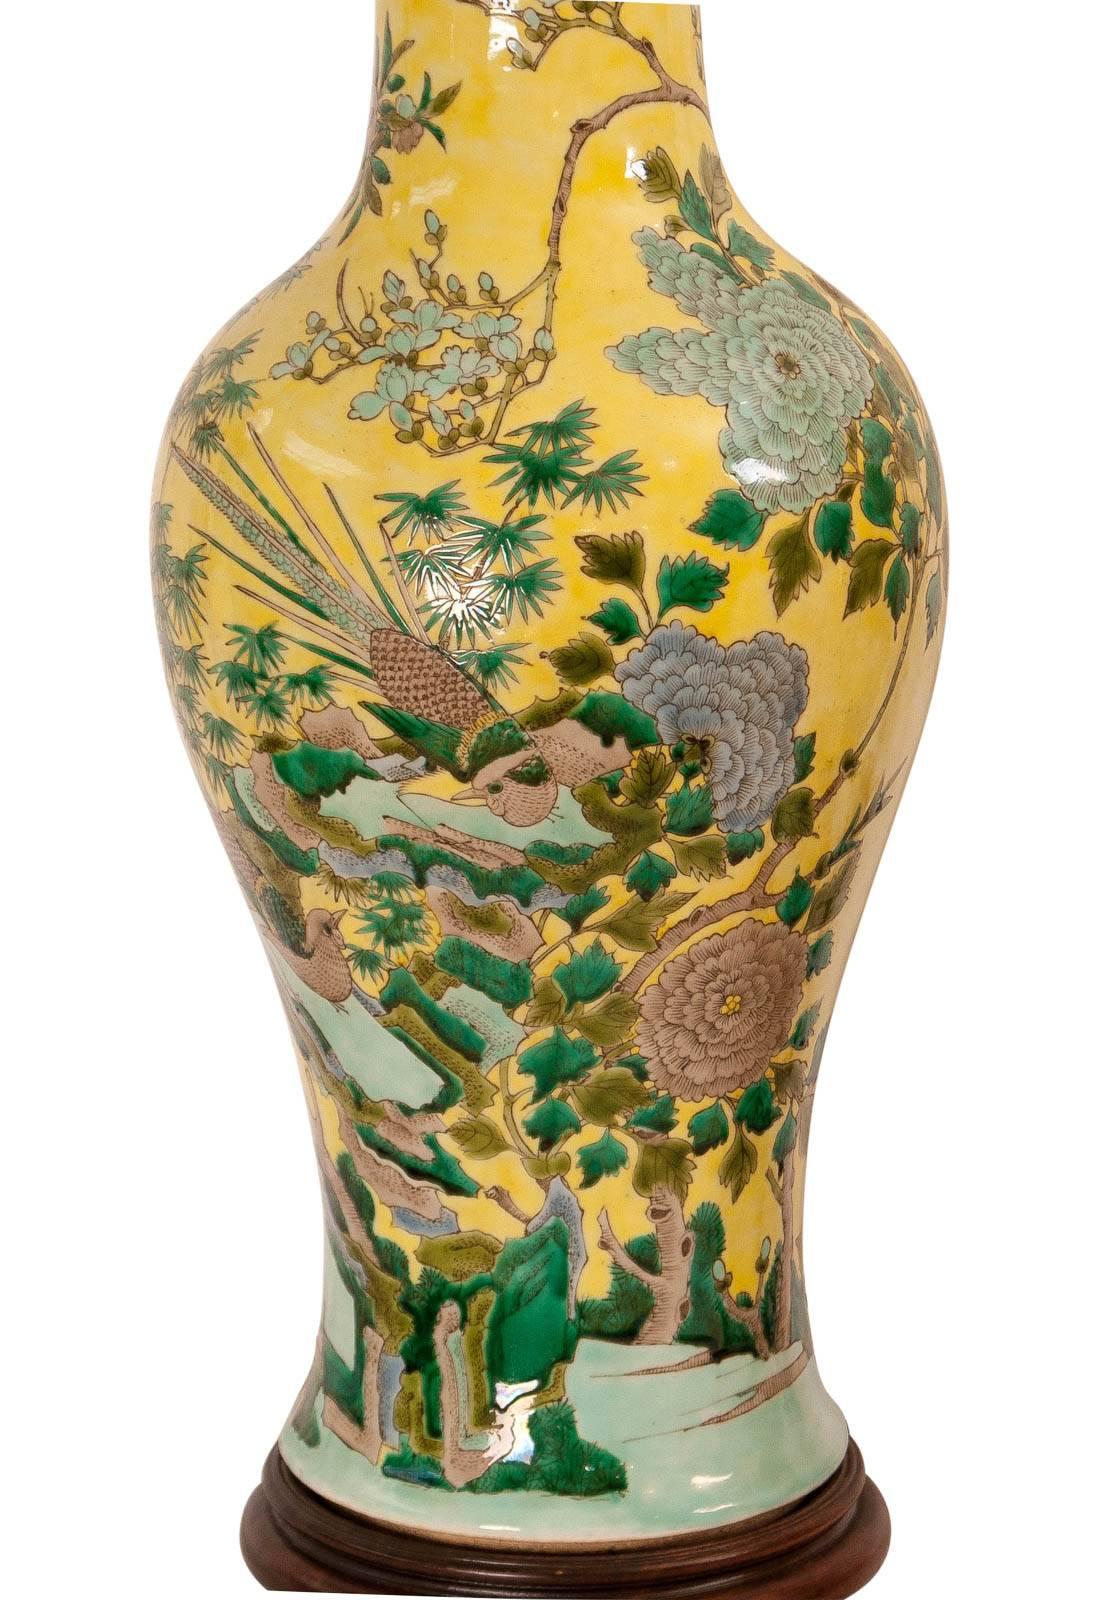 A large pair of yellow ground Chinese porcelain vases made in the Kangxi style during the Republic period, circa 1915. Decorated all-over in greens, pale blue and grey with birds and flowers. Now mounted as large lamps on hardwood stands. One vase